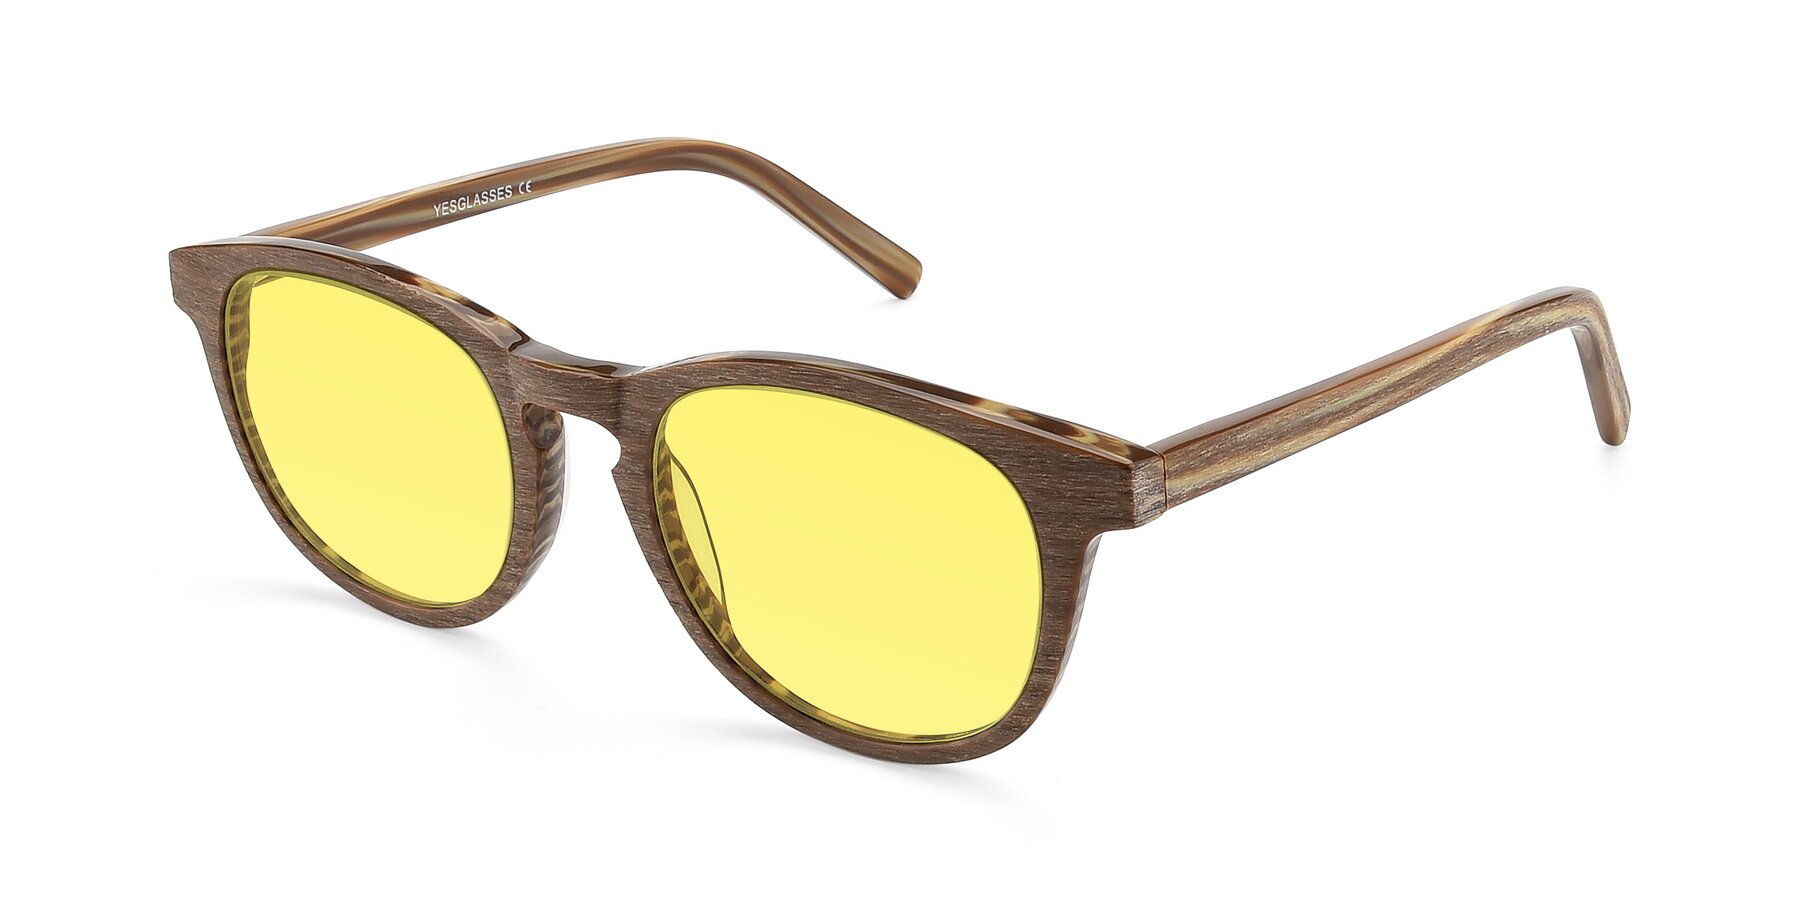 Angle of SR6044 in Brown-Wooden with Medium Yellow Tinted Lenses